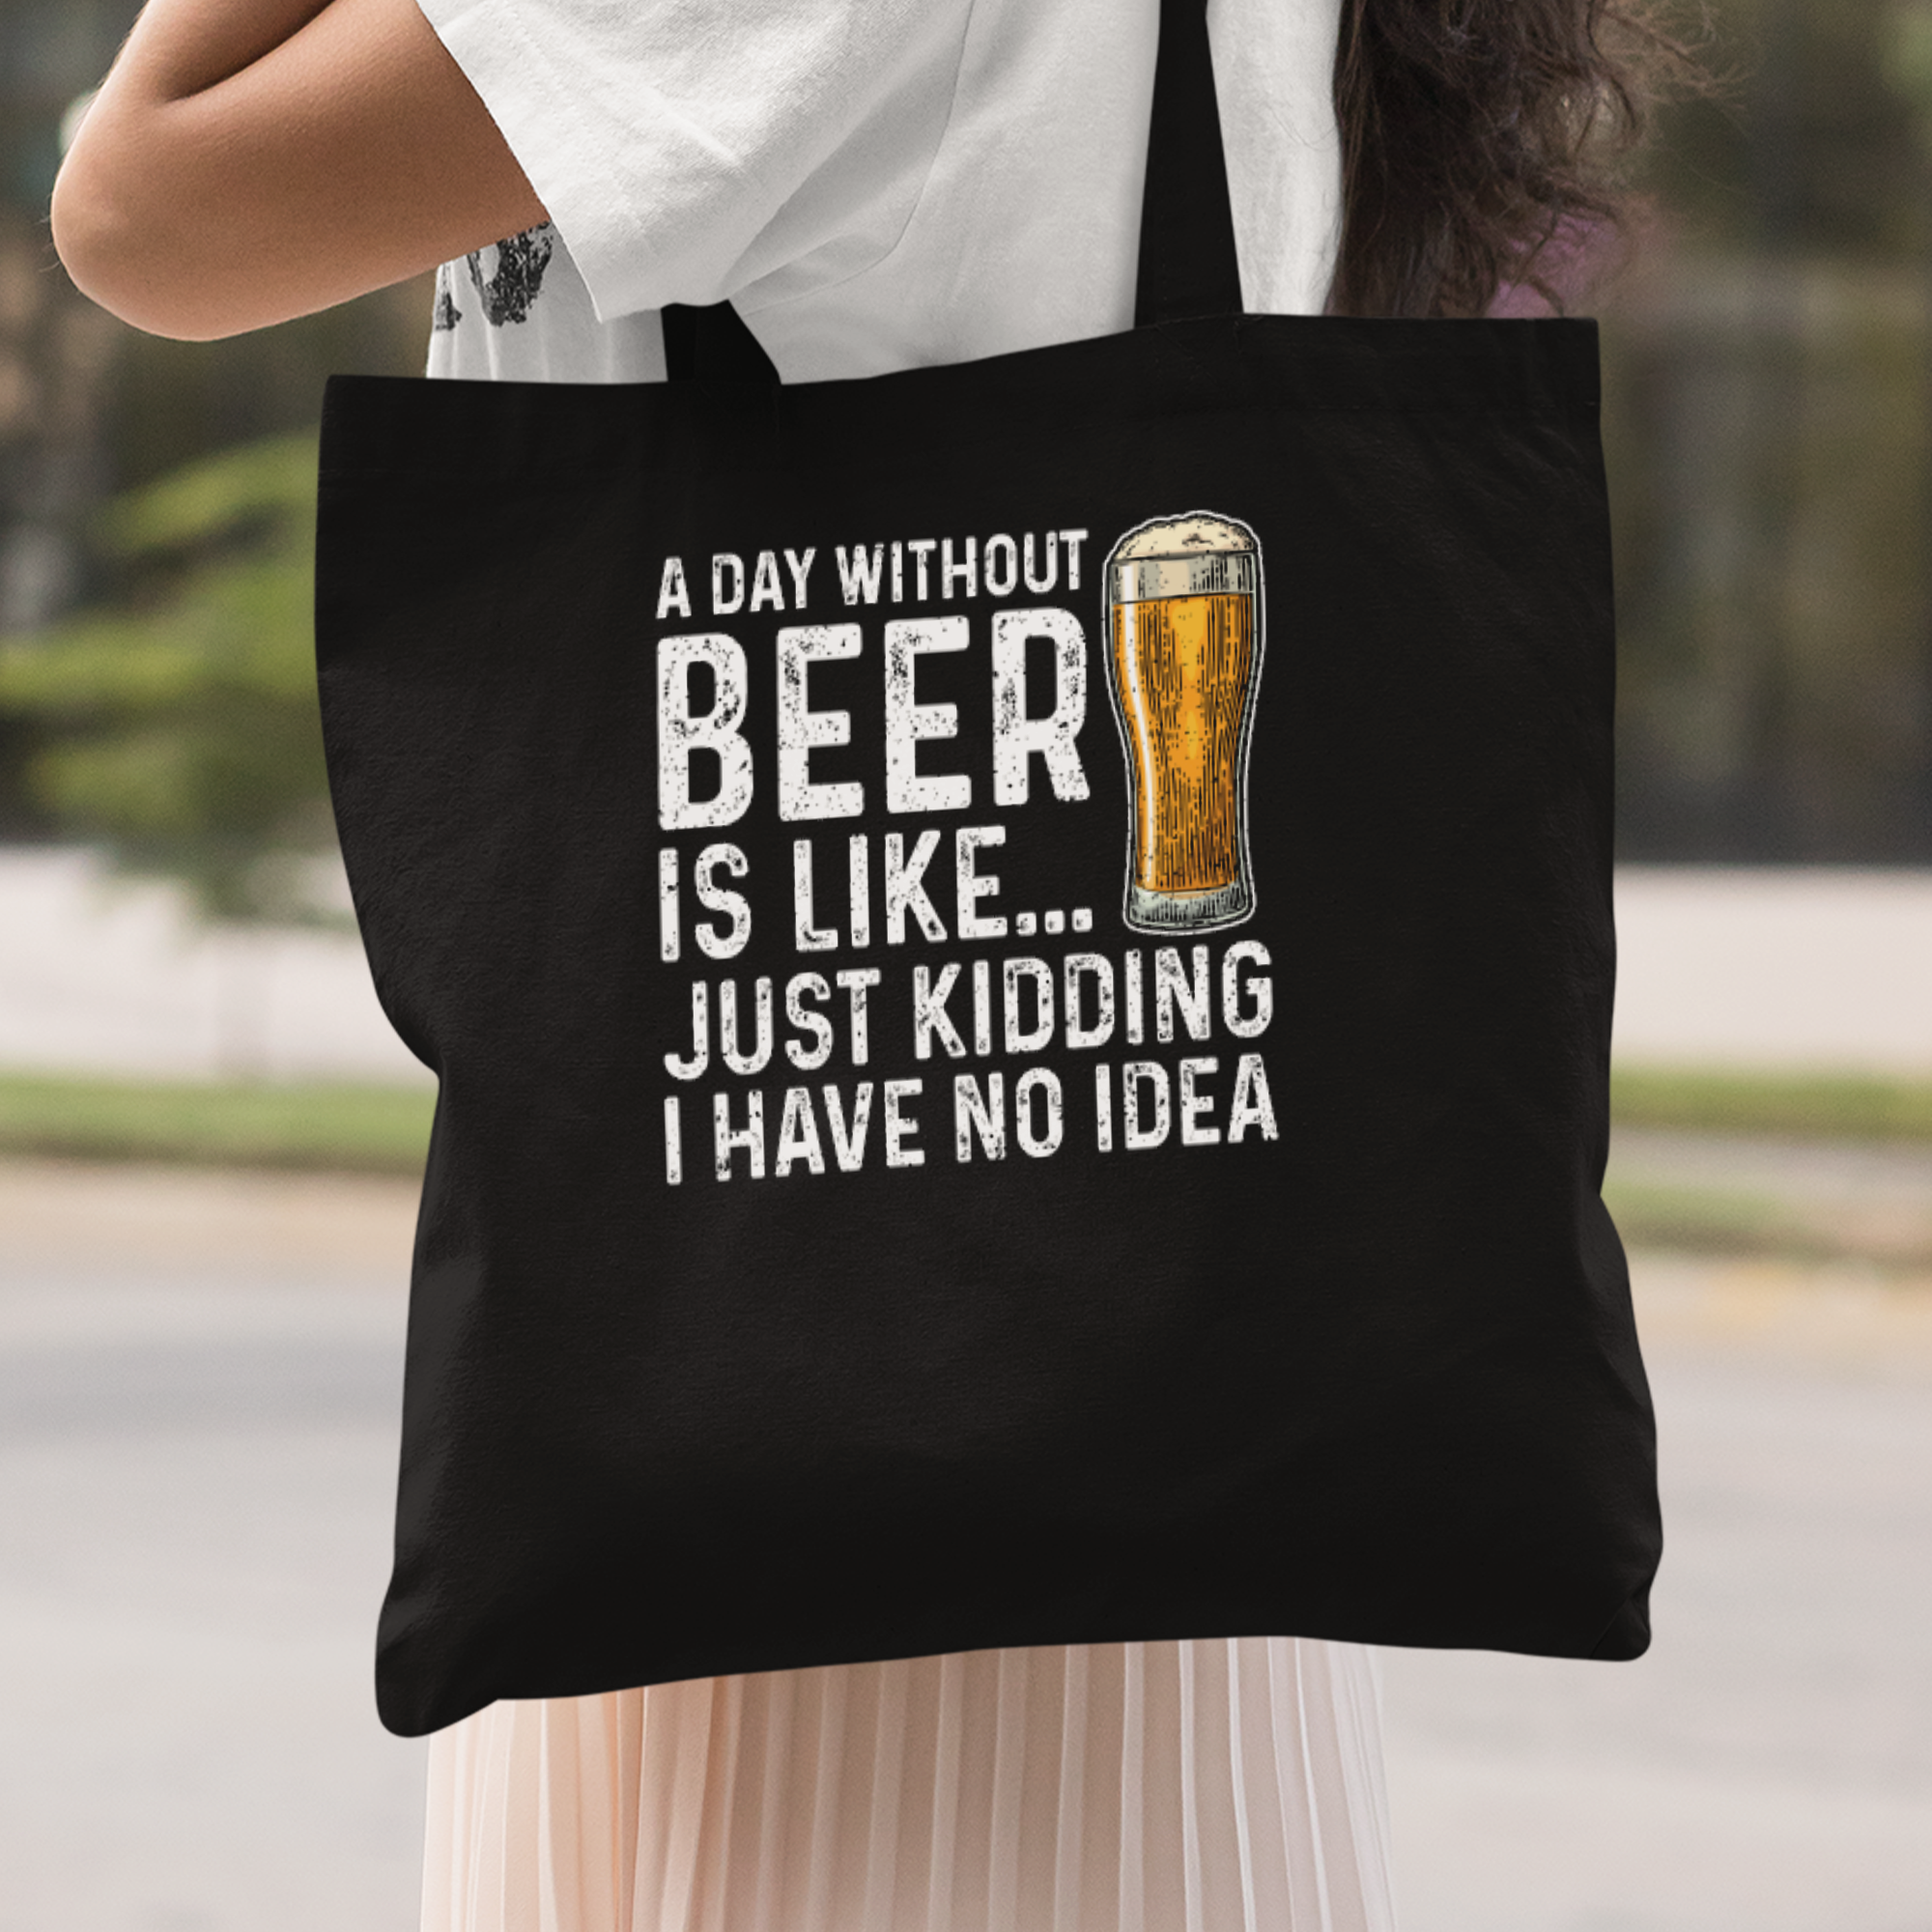 A Day Without Beer Is Like Just Kidding I Have No Idea Stoffbeutel - DESIGNSBYJNK5.COM